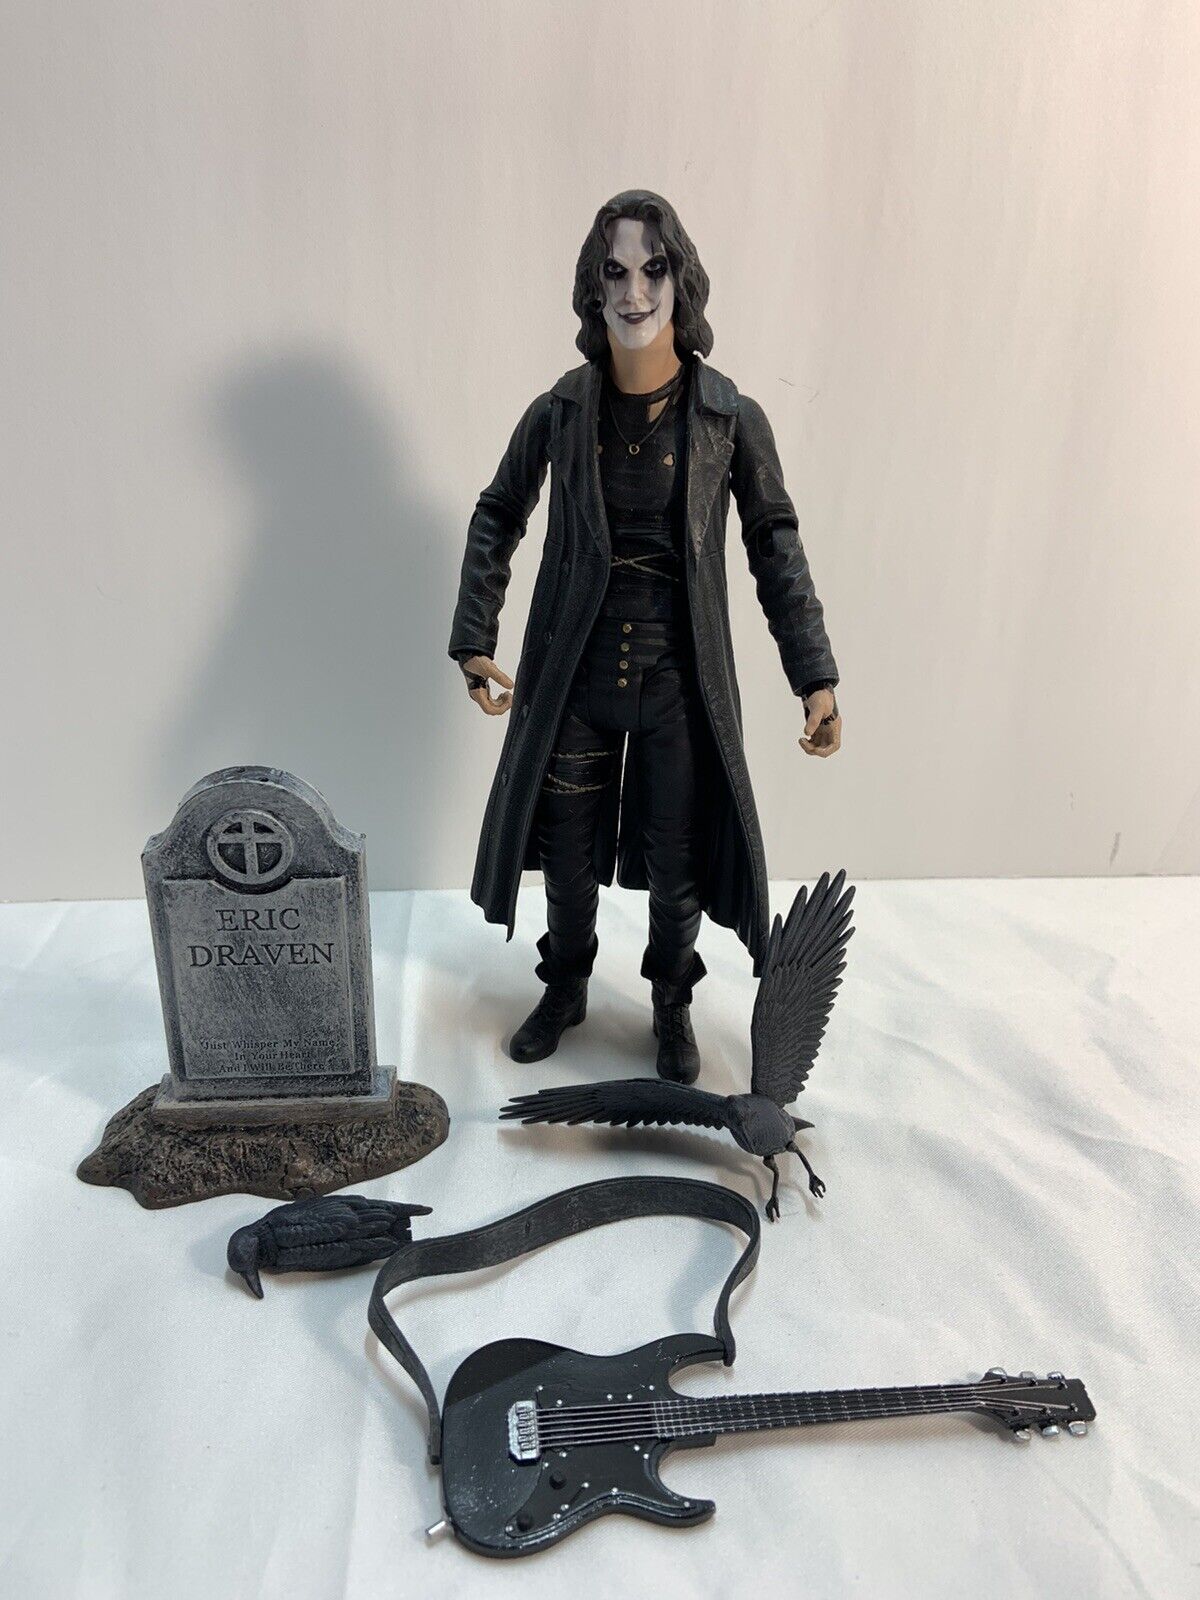 Diamond Select Toys 1994 Movie The Crow (Eric Draven) Deluxe 7" Action Figure